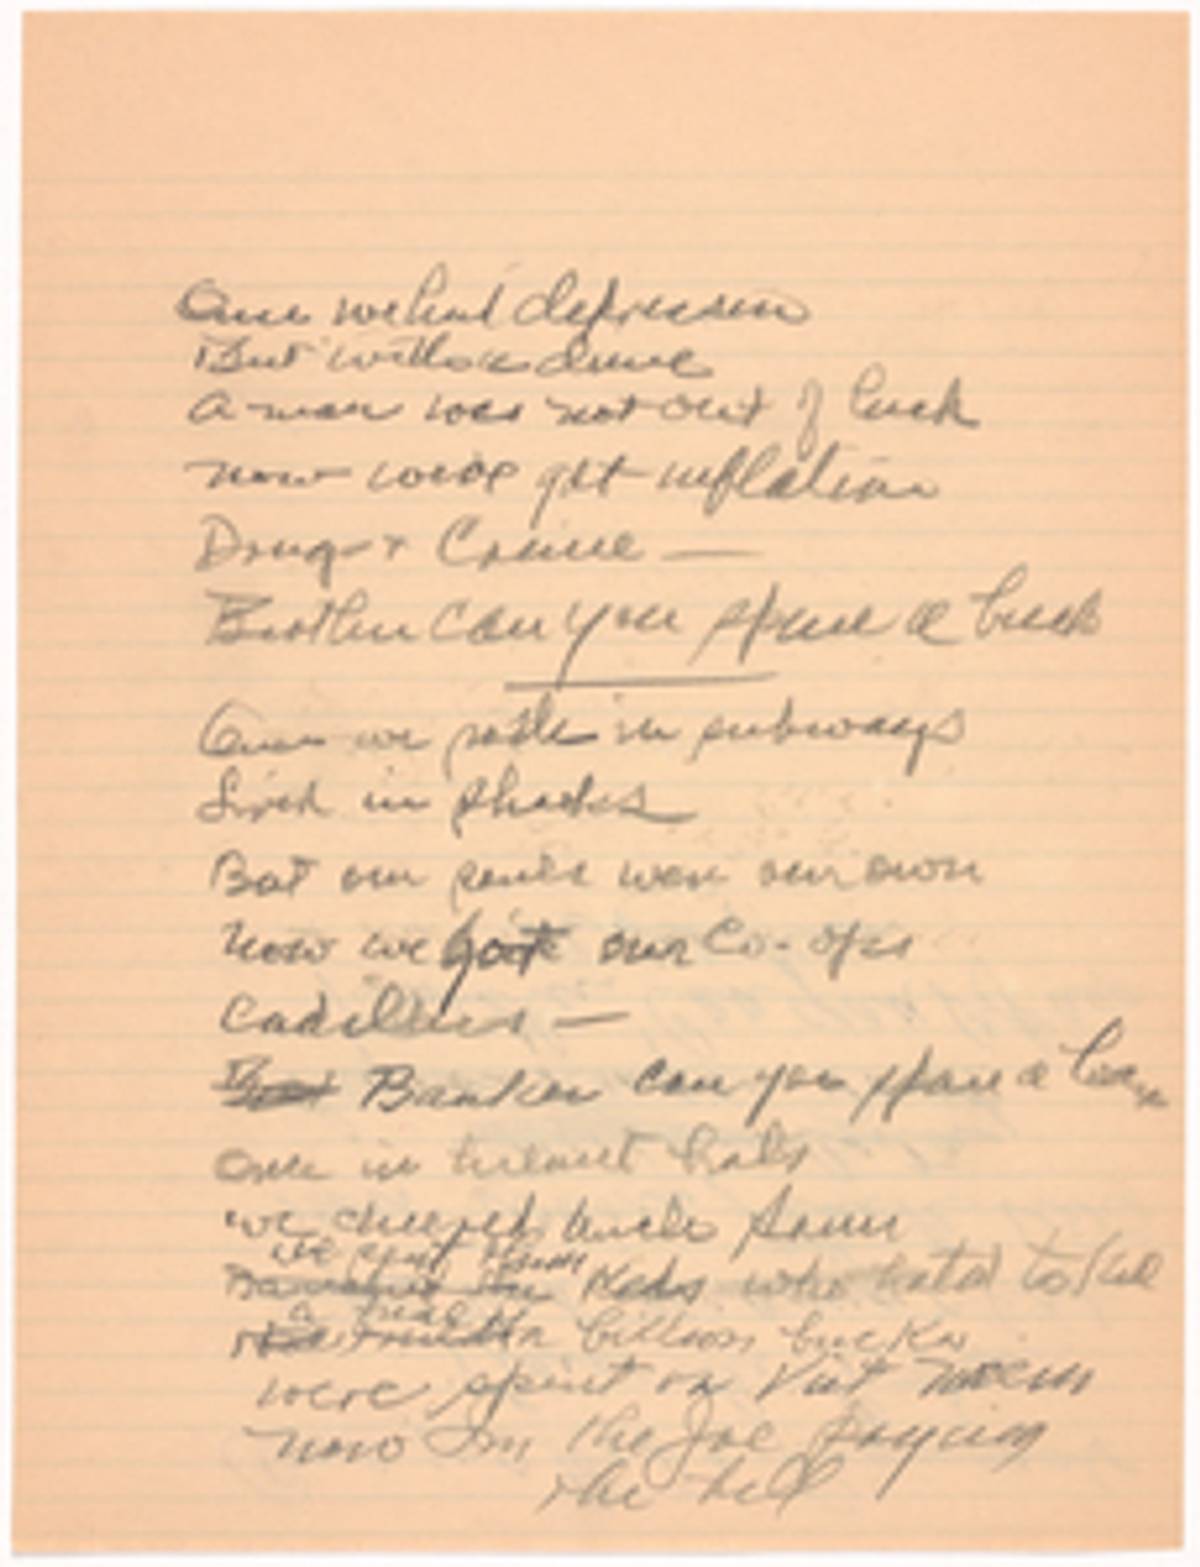 Brother can you spare a buck (Lyrics) / E. Y. (Edgar Yipsel) Harburg (New York Public Library)